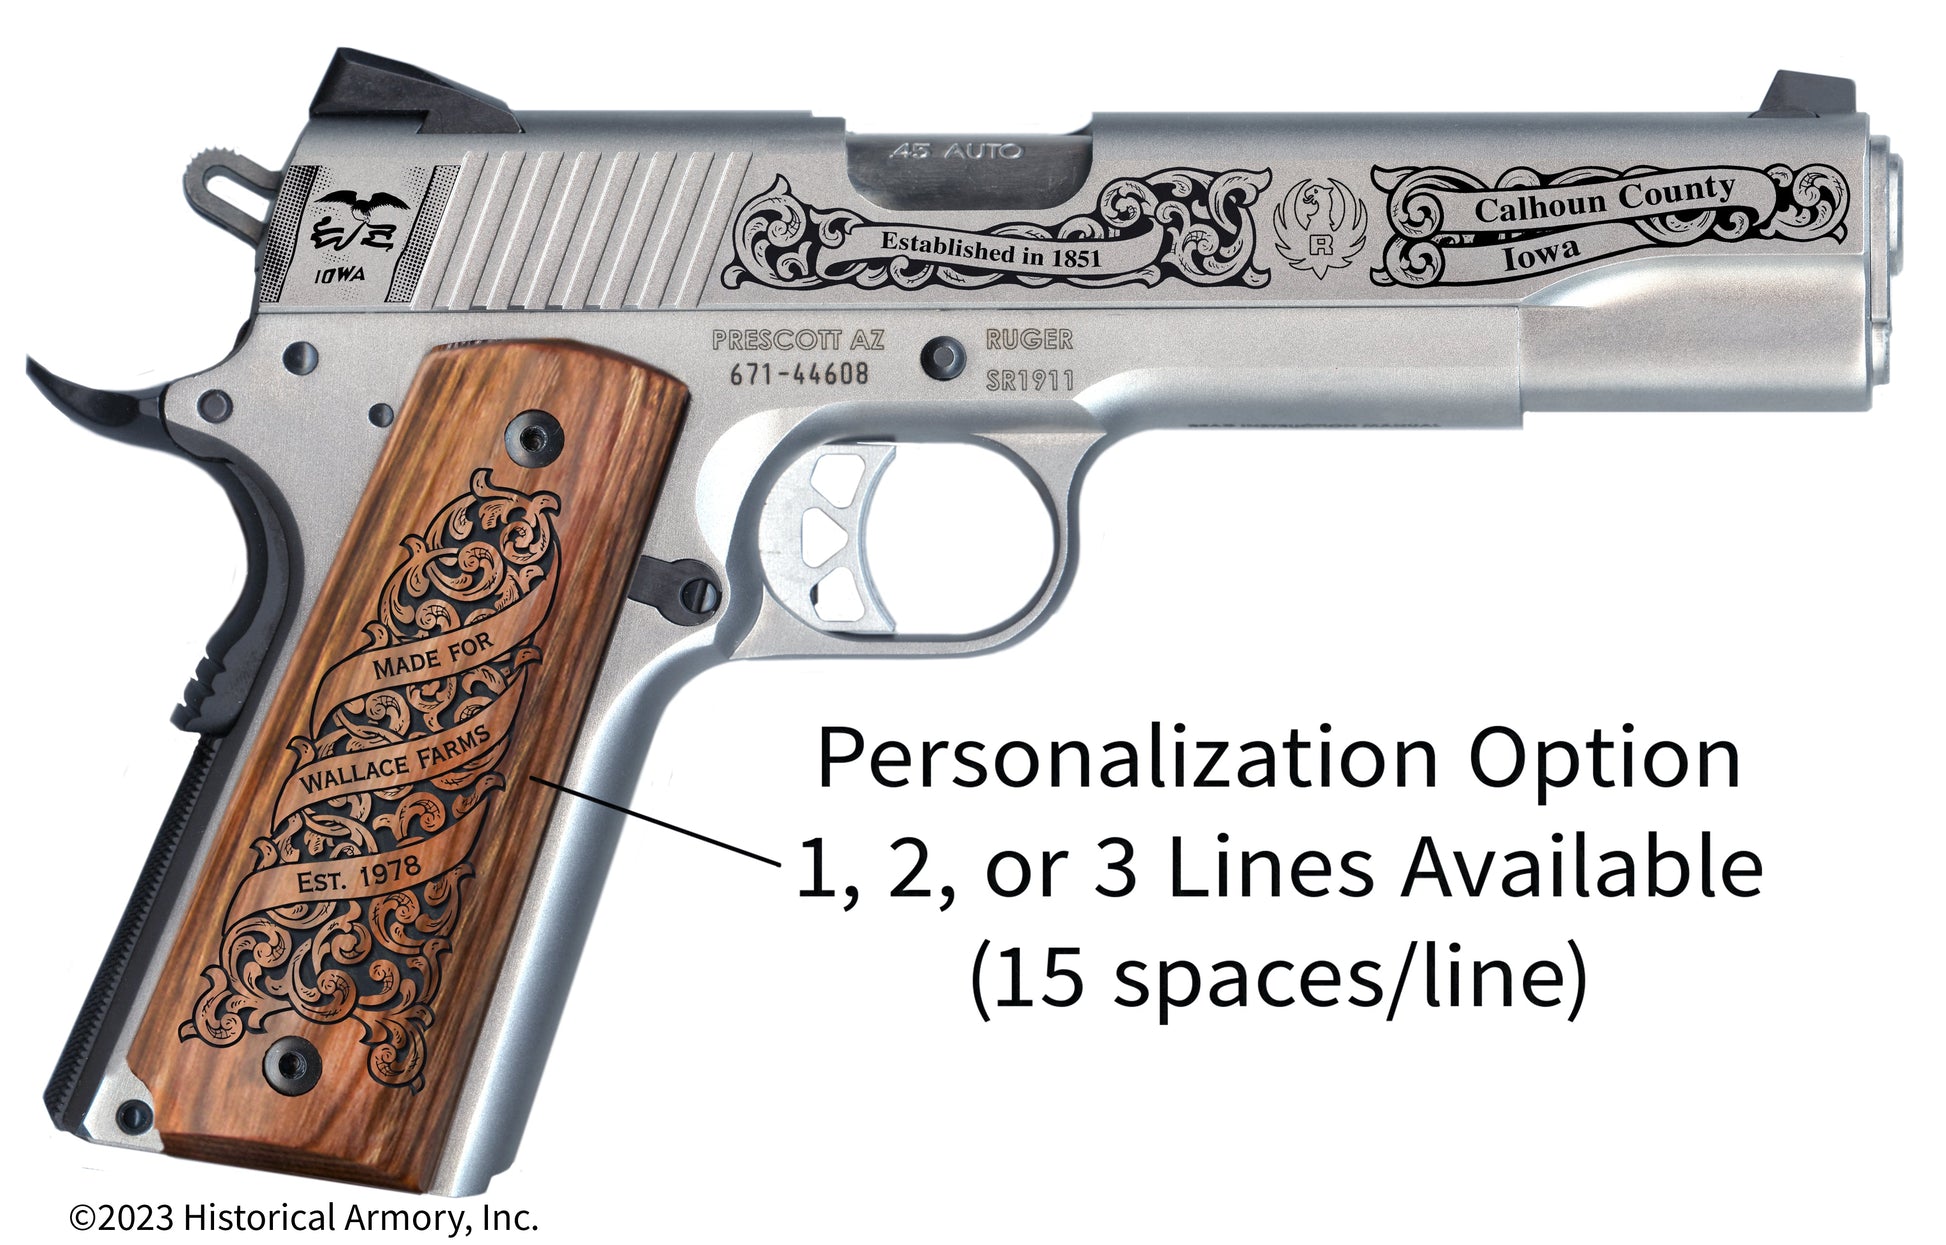 Calhoun County Iowa Personalized Engraved .45 Auto Ruger 1911